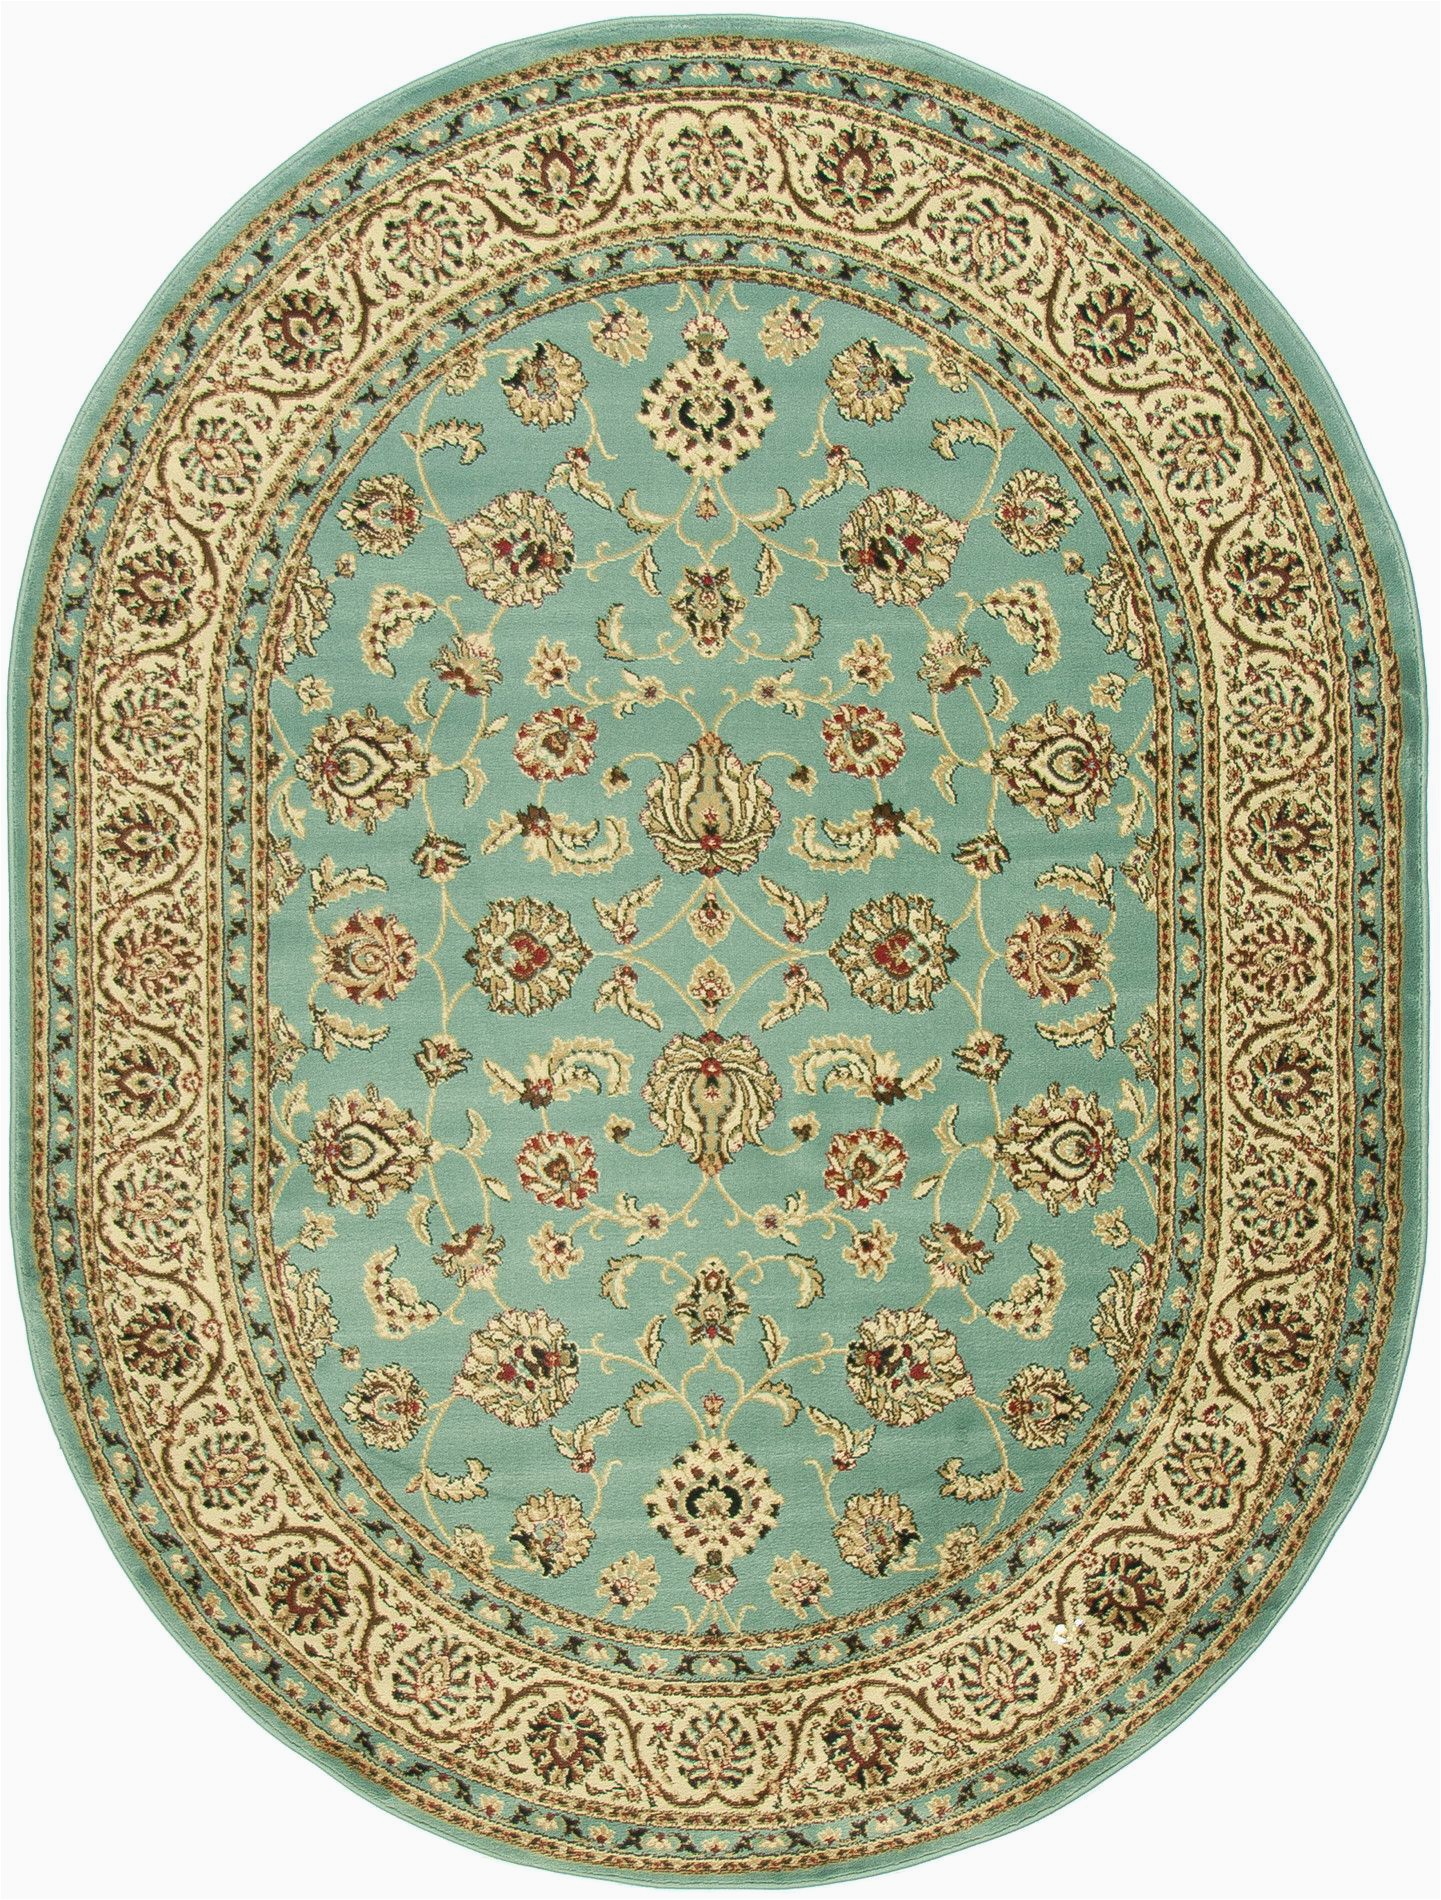 Oval area Rugs Near Me Line Home Store for Furniture Decor Outdoors & More